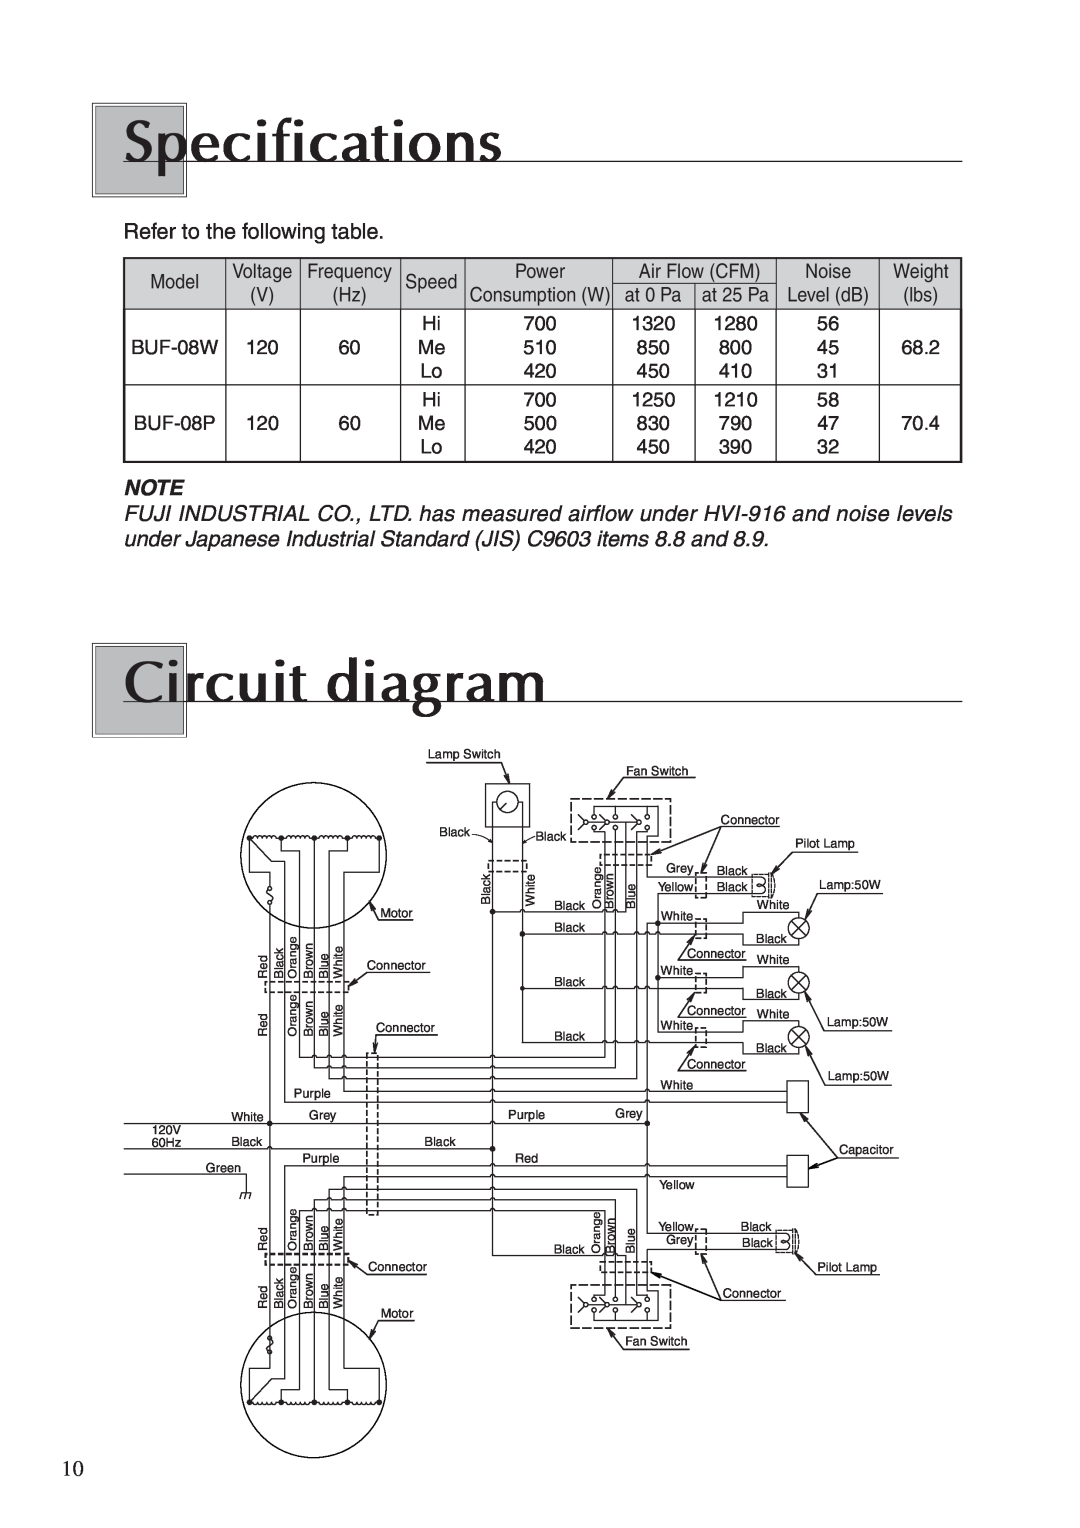 Fujioh BUF-08P, BUF-08W operation manual Specifications, Circuit diagram, Refer to the following table 